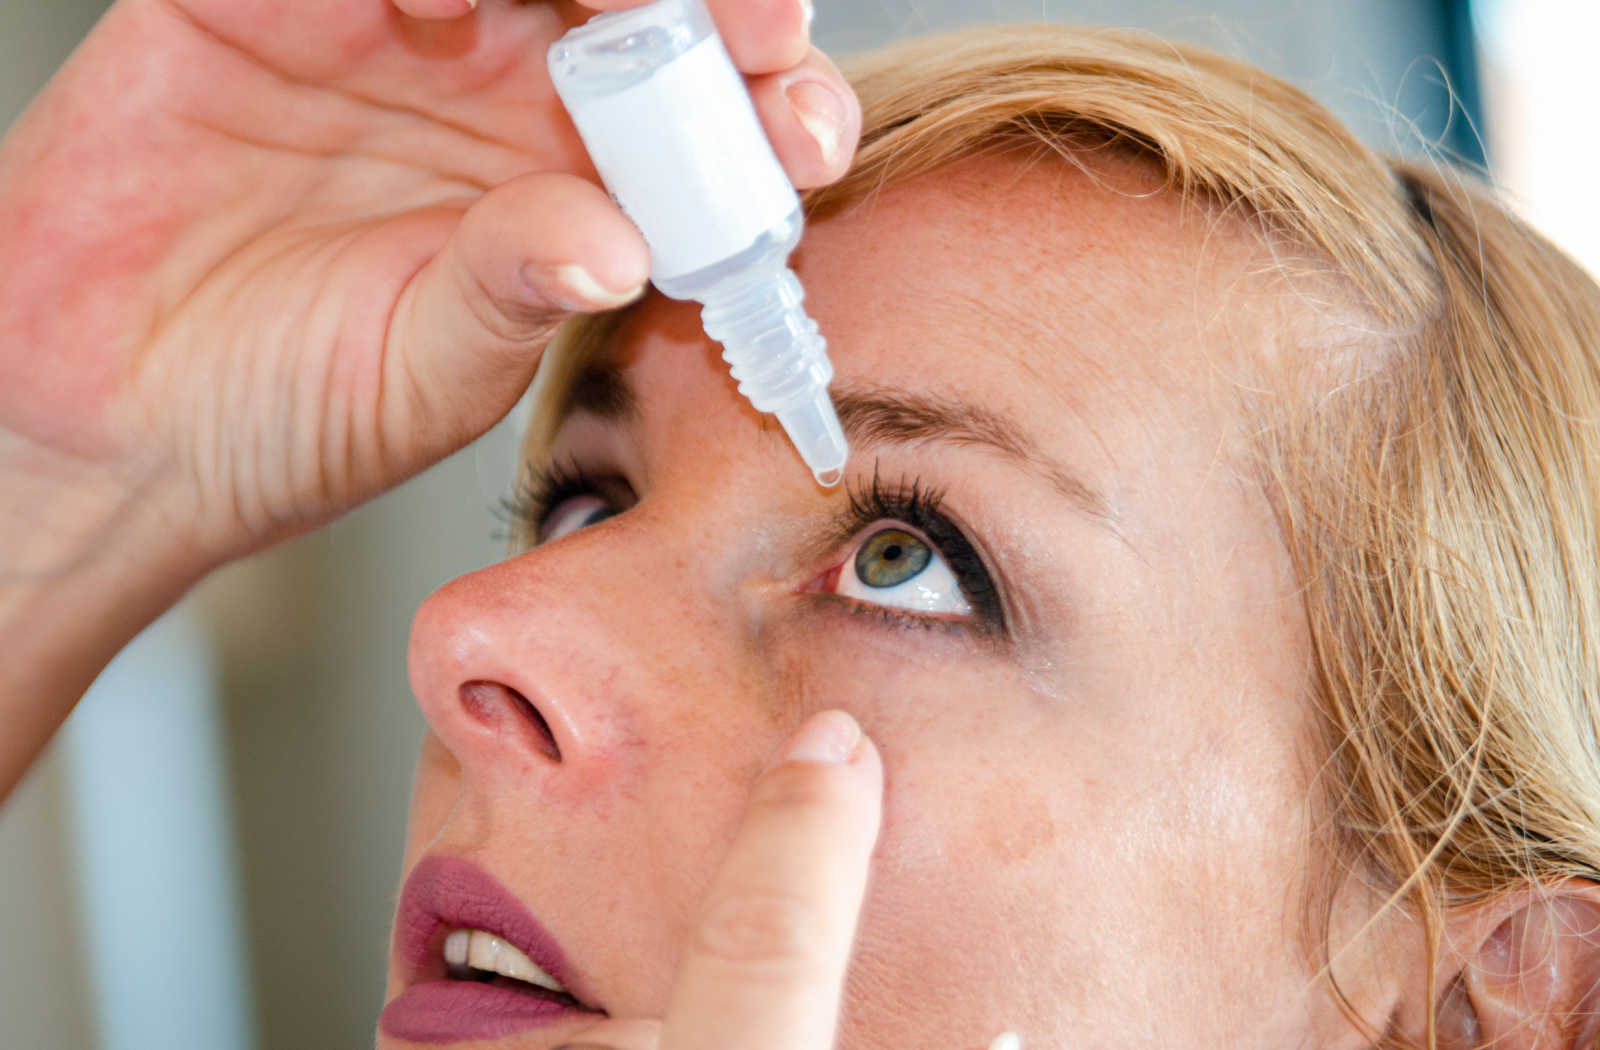 A close-up of a woman applying eye drops in her eye.